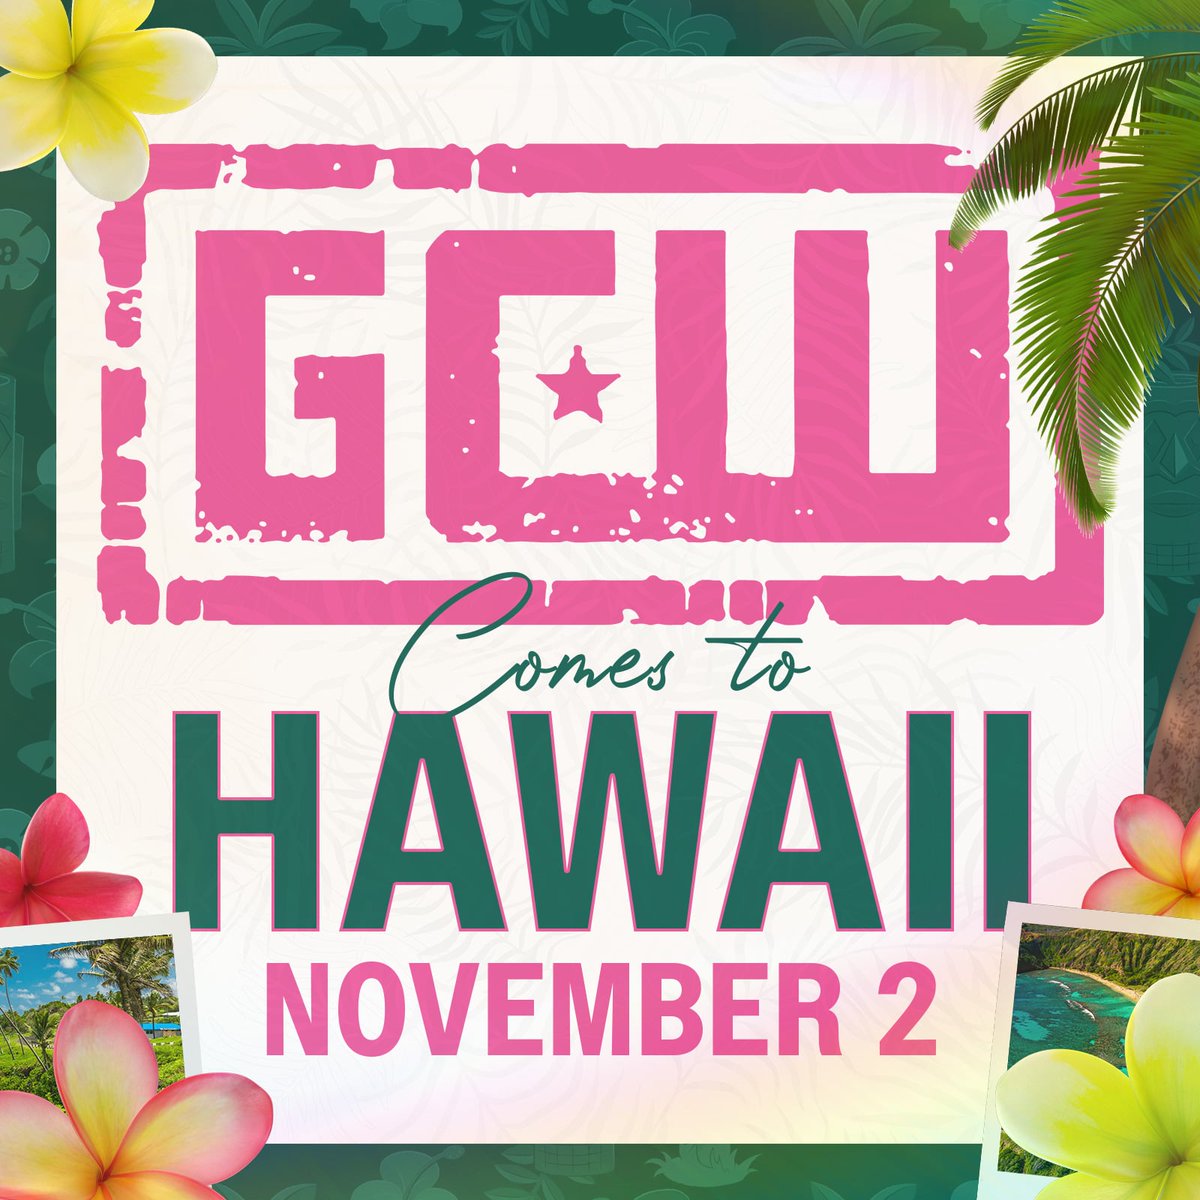 *SAVE THE DATE* GCW comes to HAWAII for the first time on Saturday, November 2nd! Tickets and additional info coming soon... Watch LIVE on @FiteTV+!